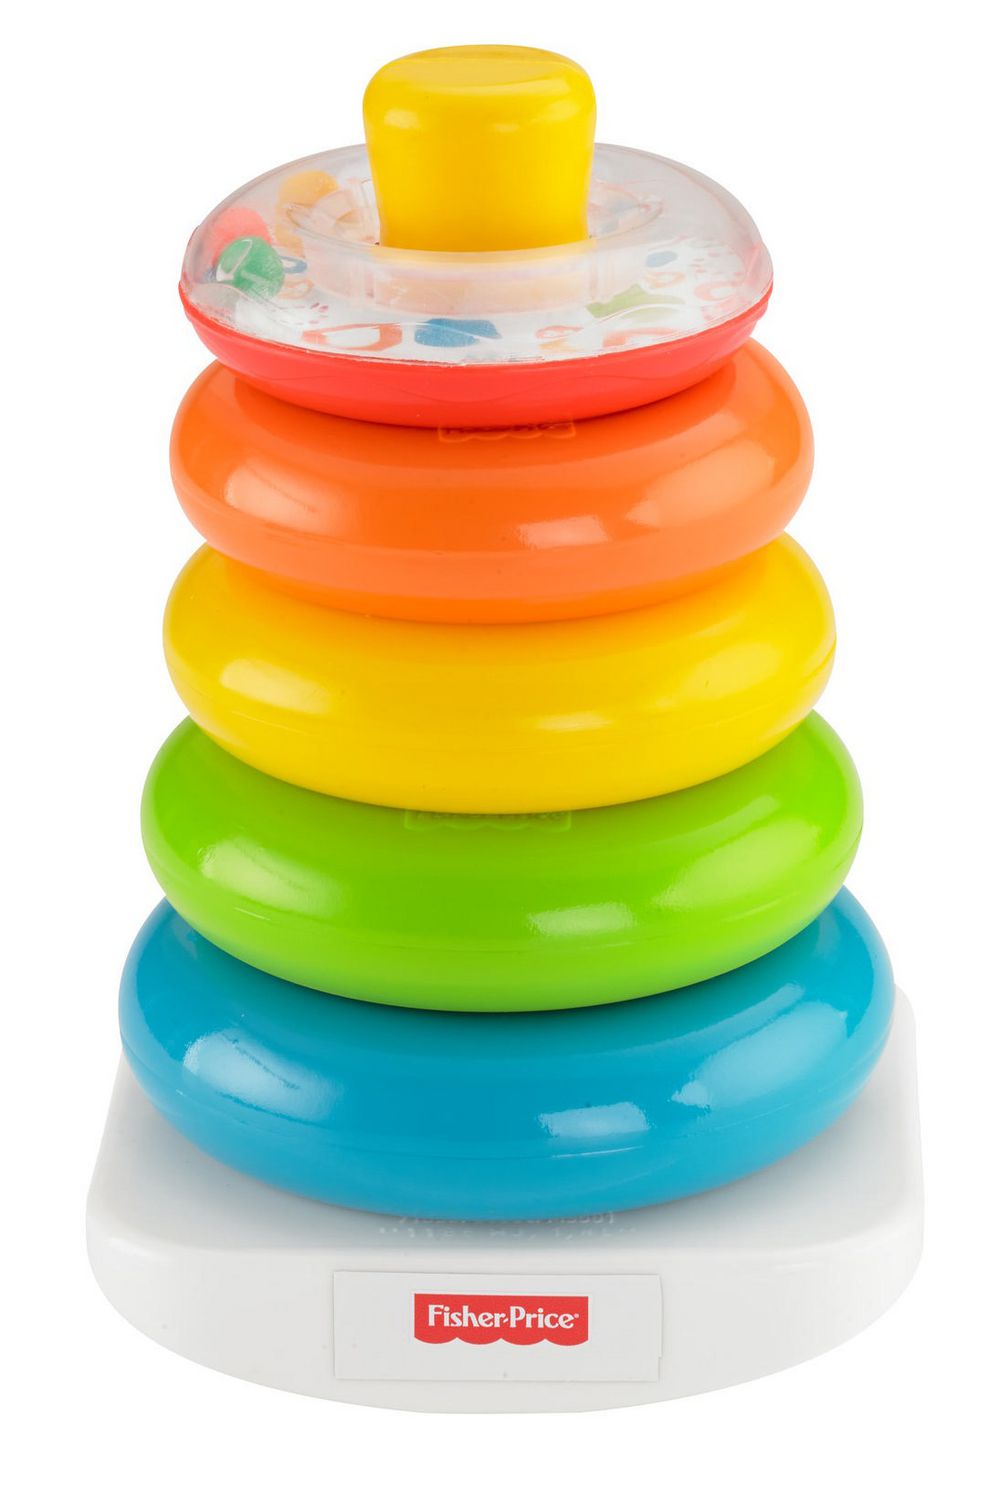 fisher price ring tower